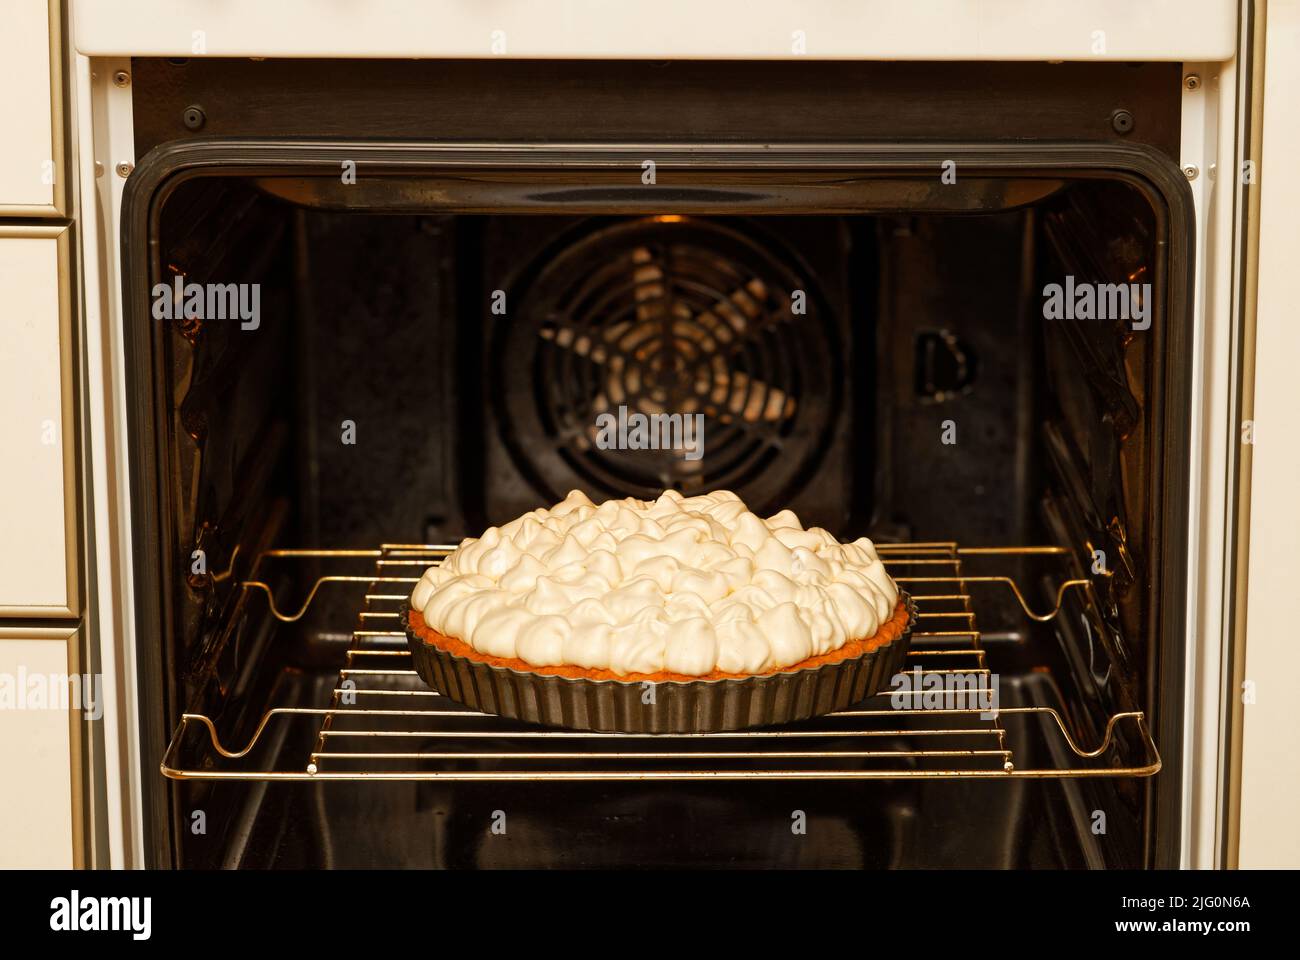 Closeup homemade berry pie decorated with meringue baked in a home oven. Shallow focus. Stock Photo